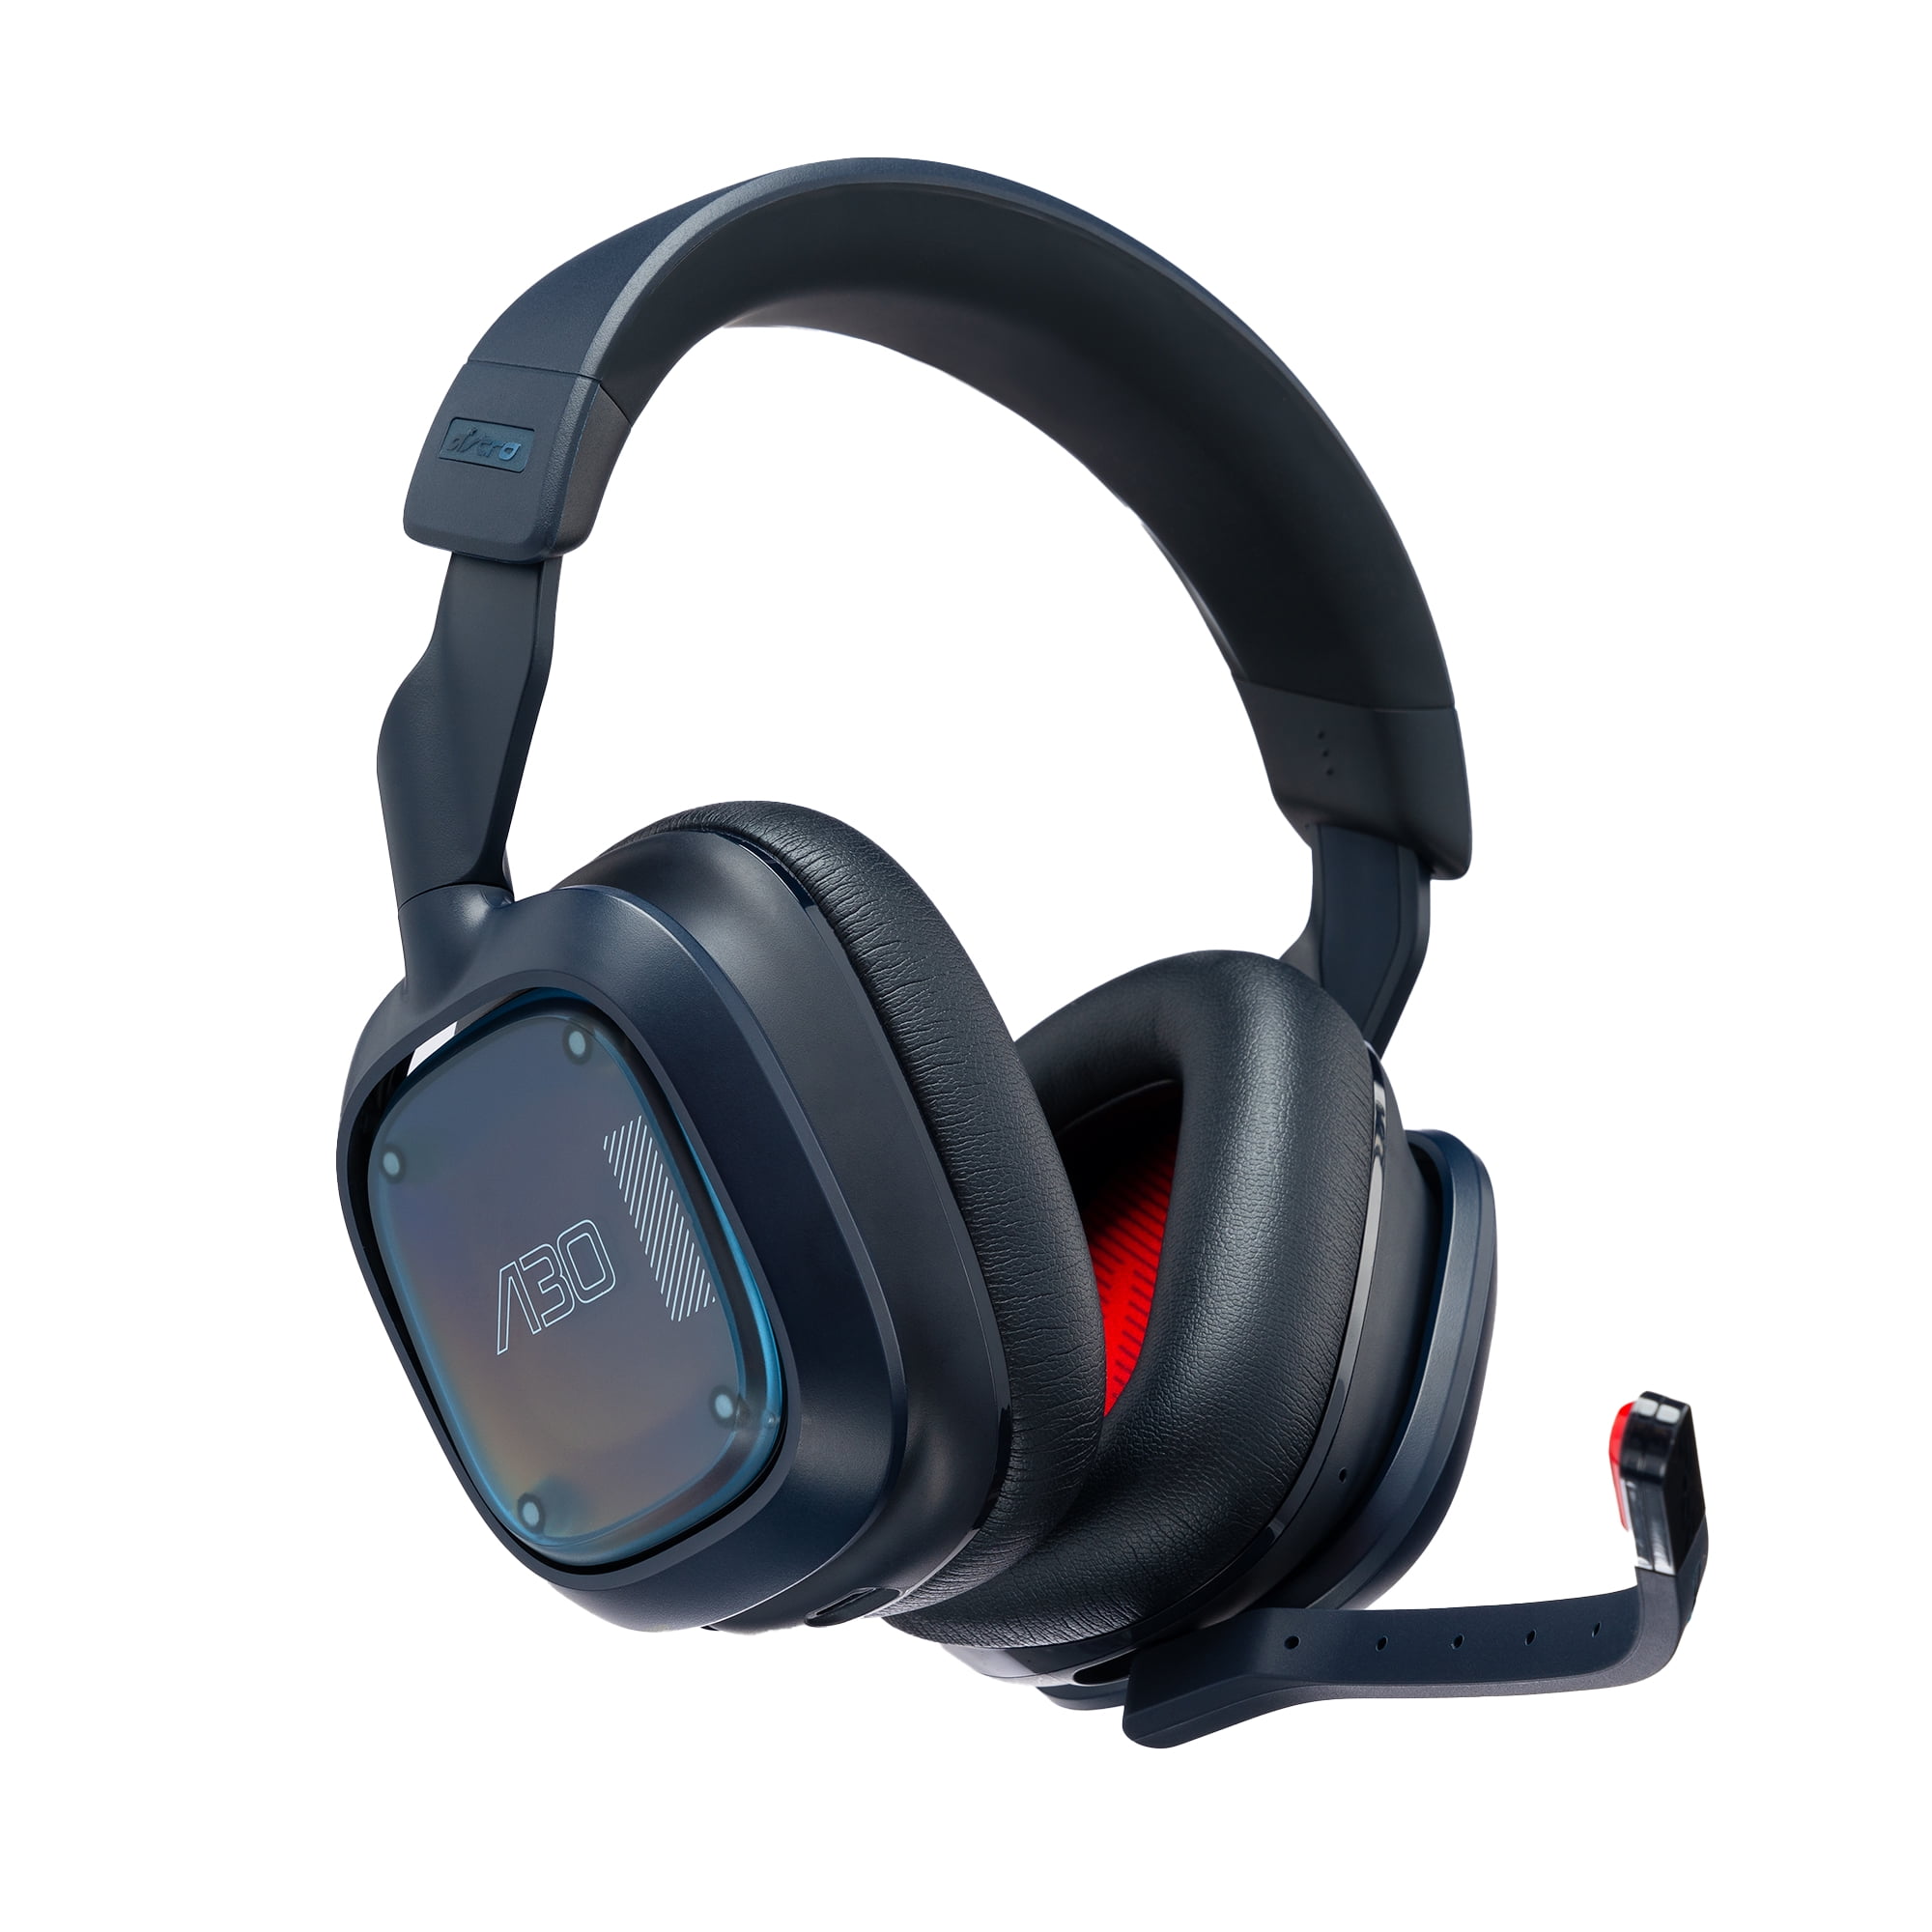 Astro A30 Wireless Gaming Headset Review - PowerUp!